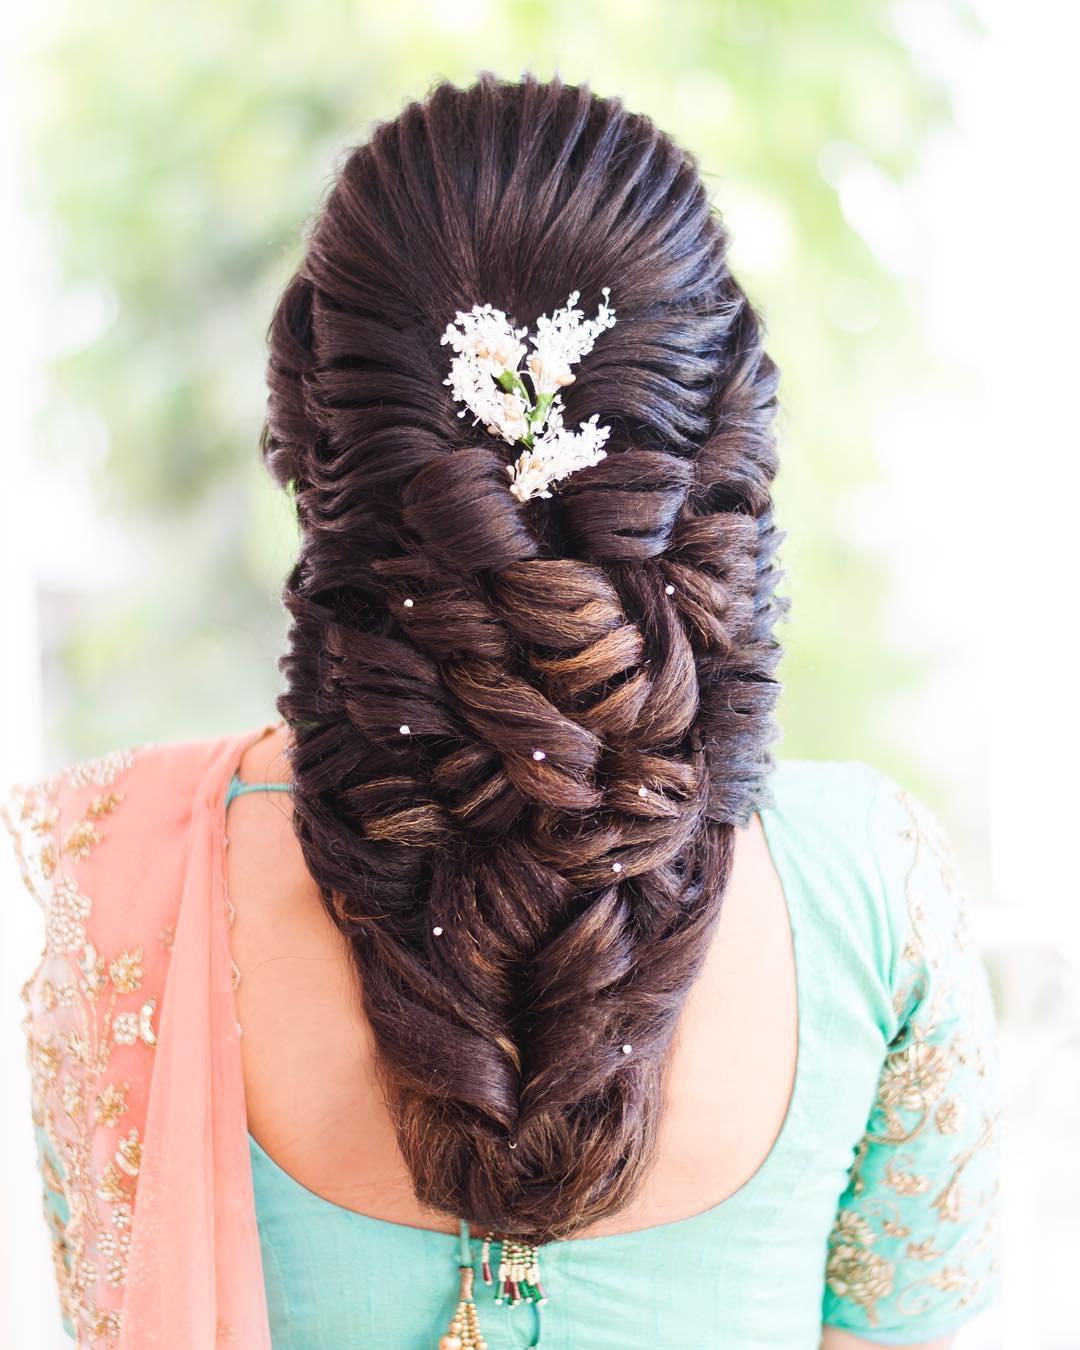 Pin by Marly Nunes on hair | Mother of the bride hair, Mother of the groom  hairstyles, Mother of the bride hairdos